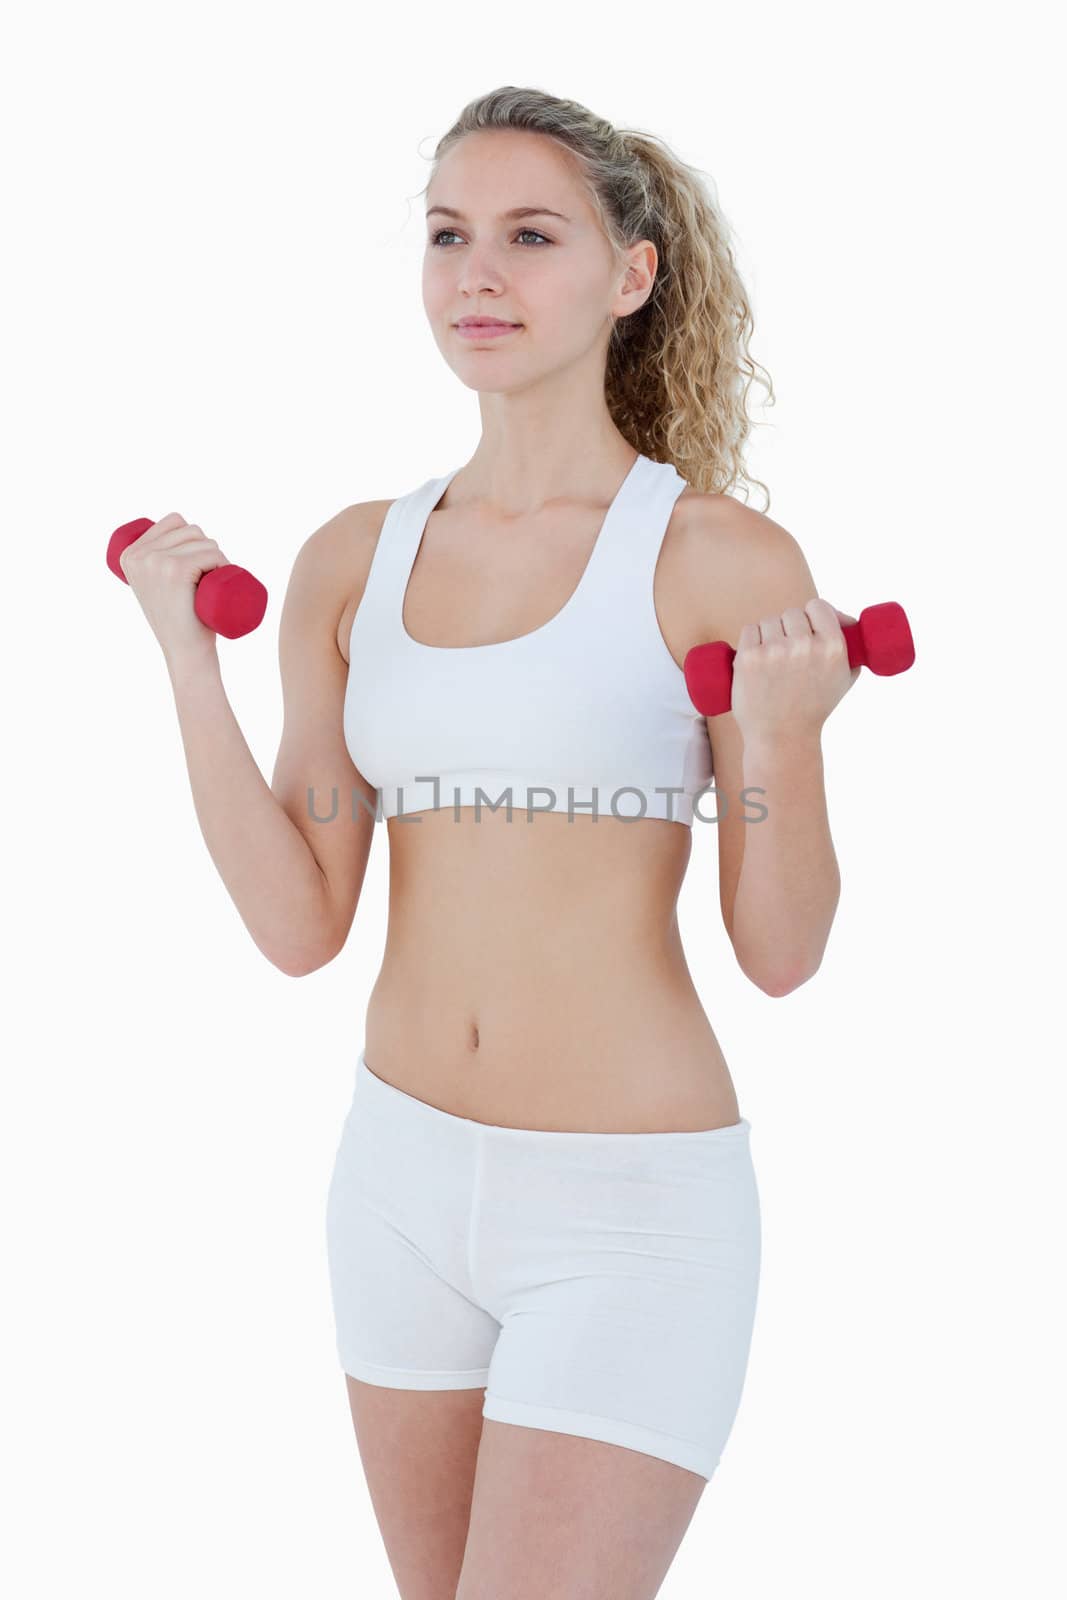 Concentrated attractive teenager lifting red weights by Wavebreakmedia